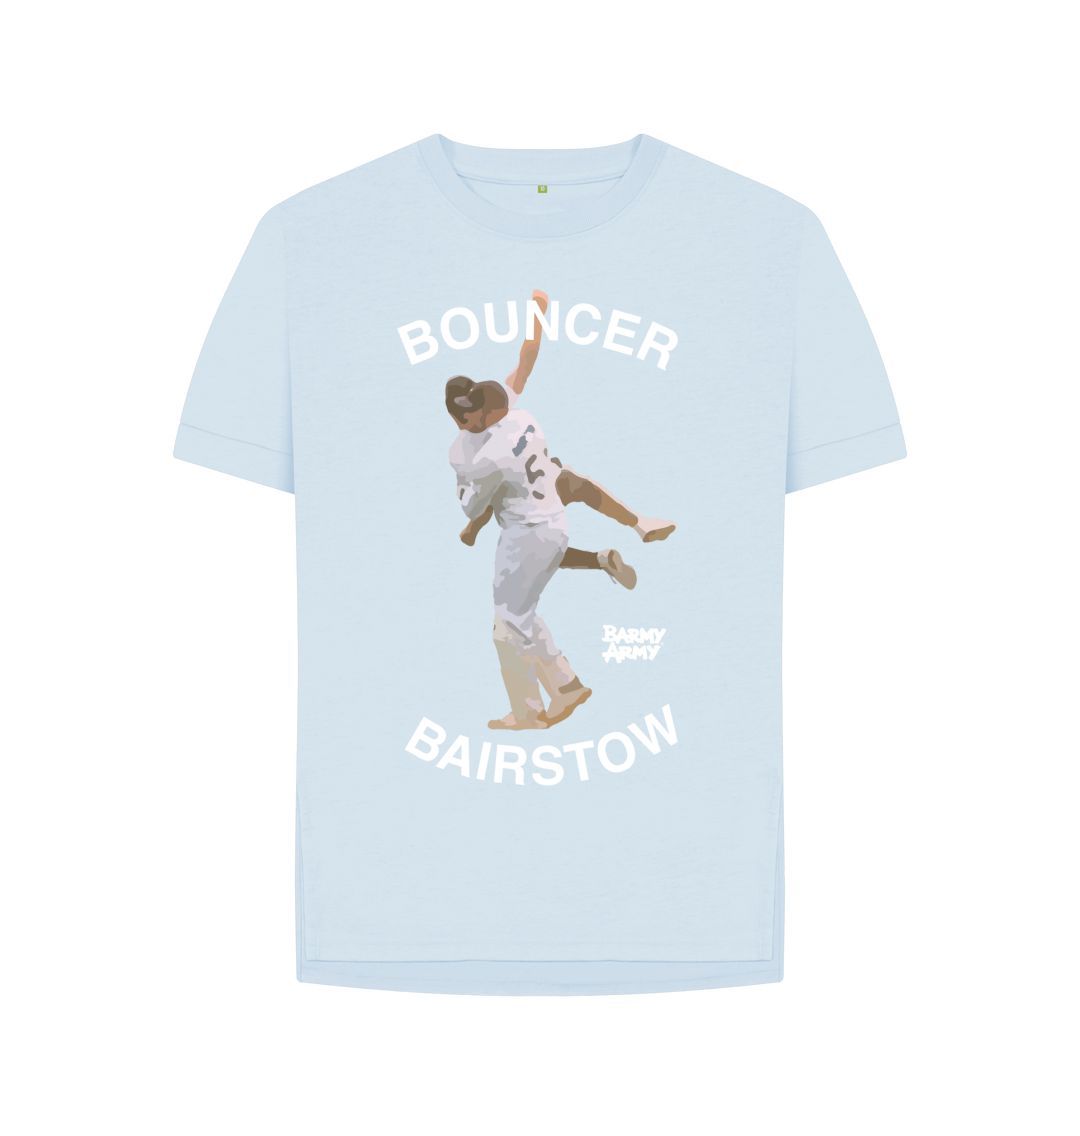 Sky Blue Barmy Army Bouncer Bairstow Relaxed Fit Ladies Tee